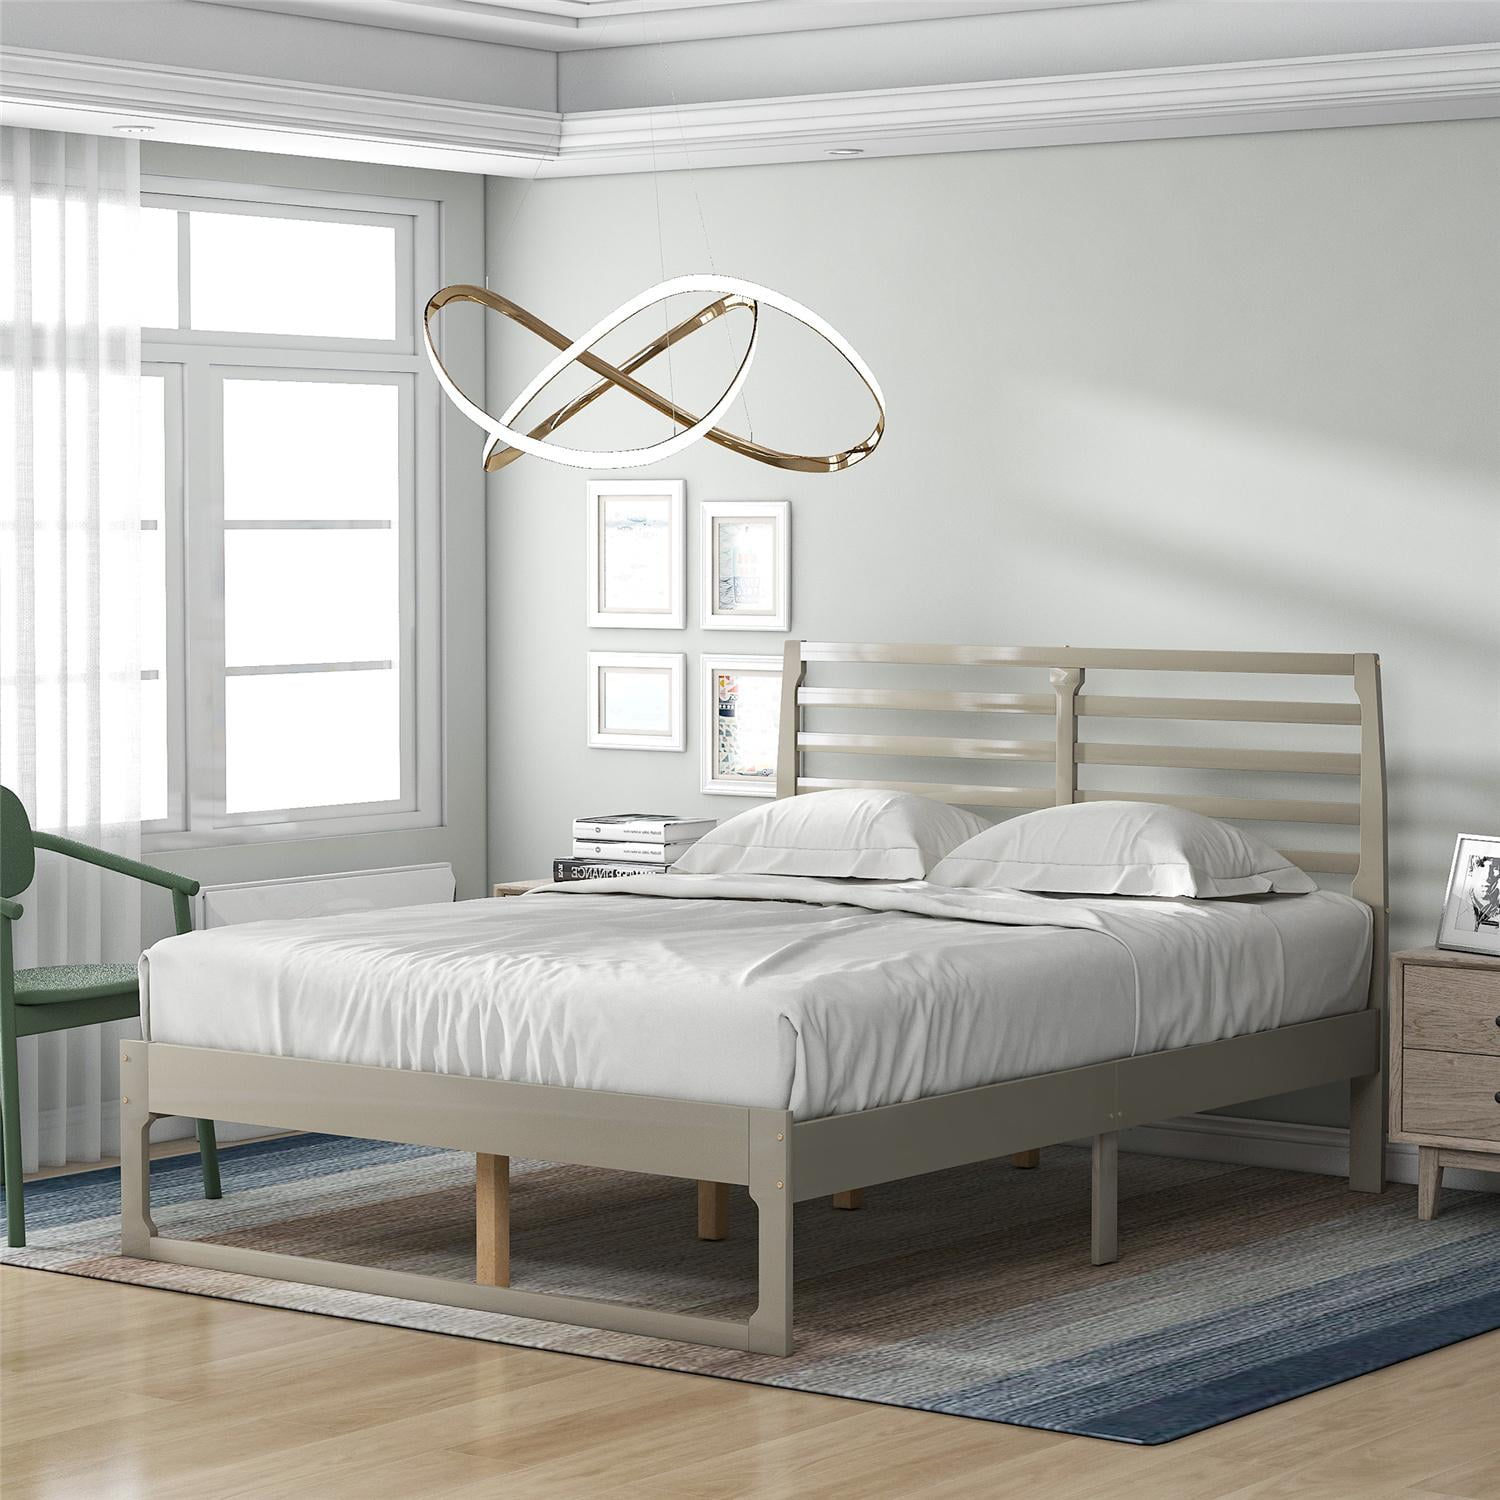 Details about   Contemporary Platform Bed Frame with Headboard and Wooden Slats Beig Full Size 